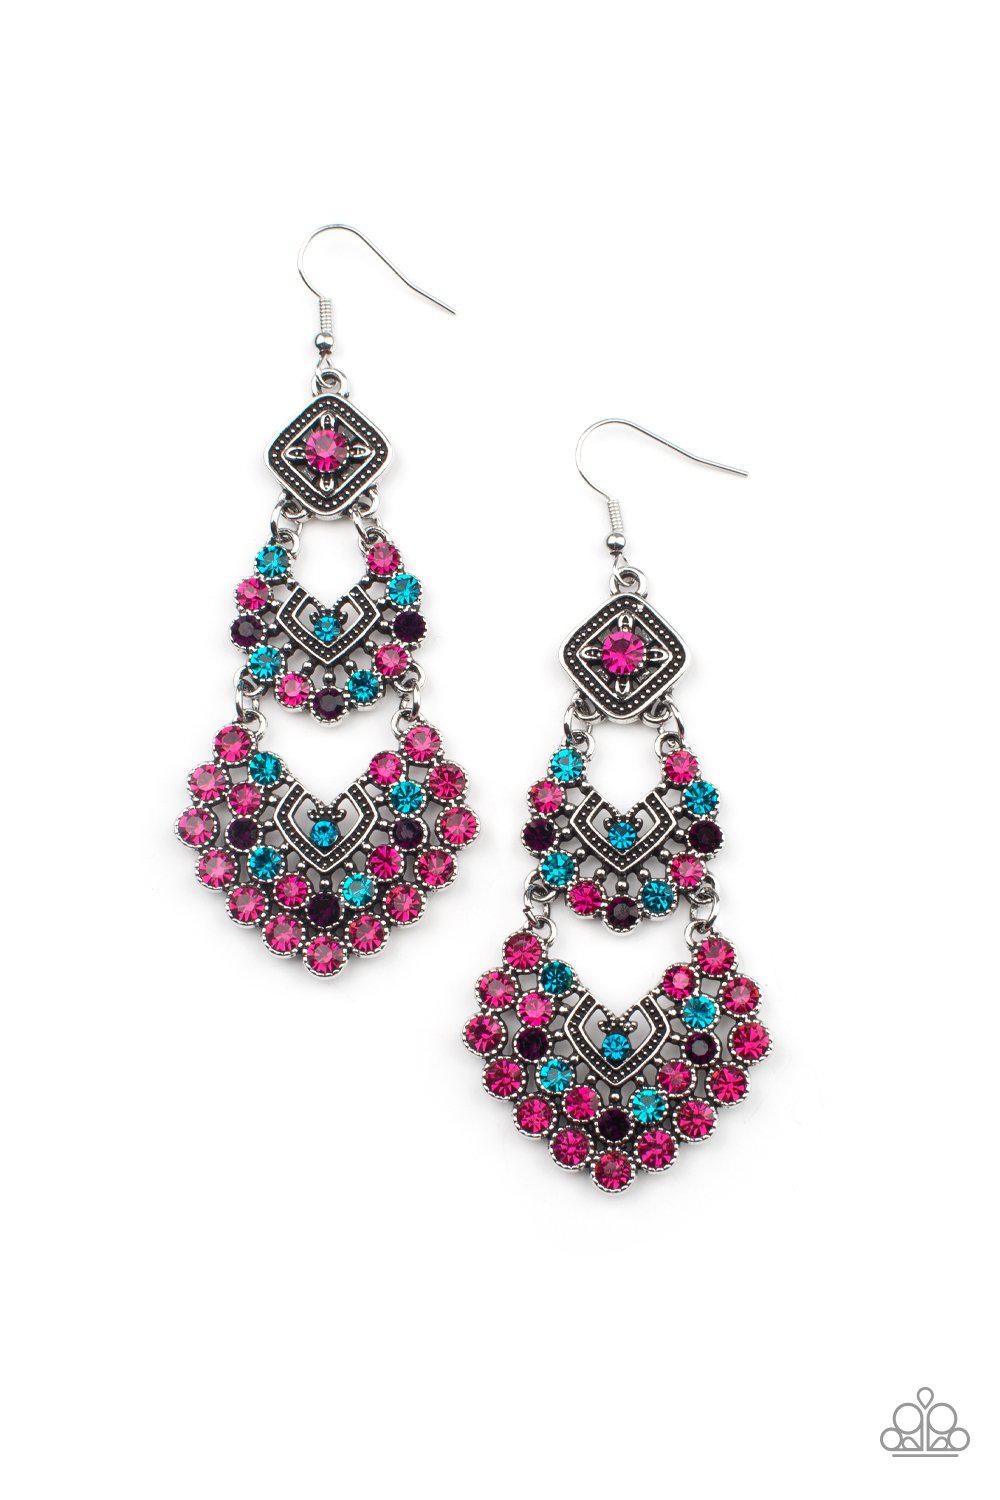 Cremation Jewelry - Pink and Blue Baby's Breath Earrings with Cremains